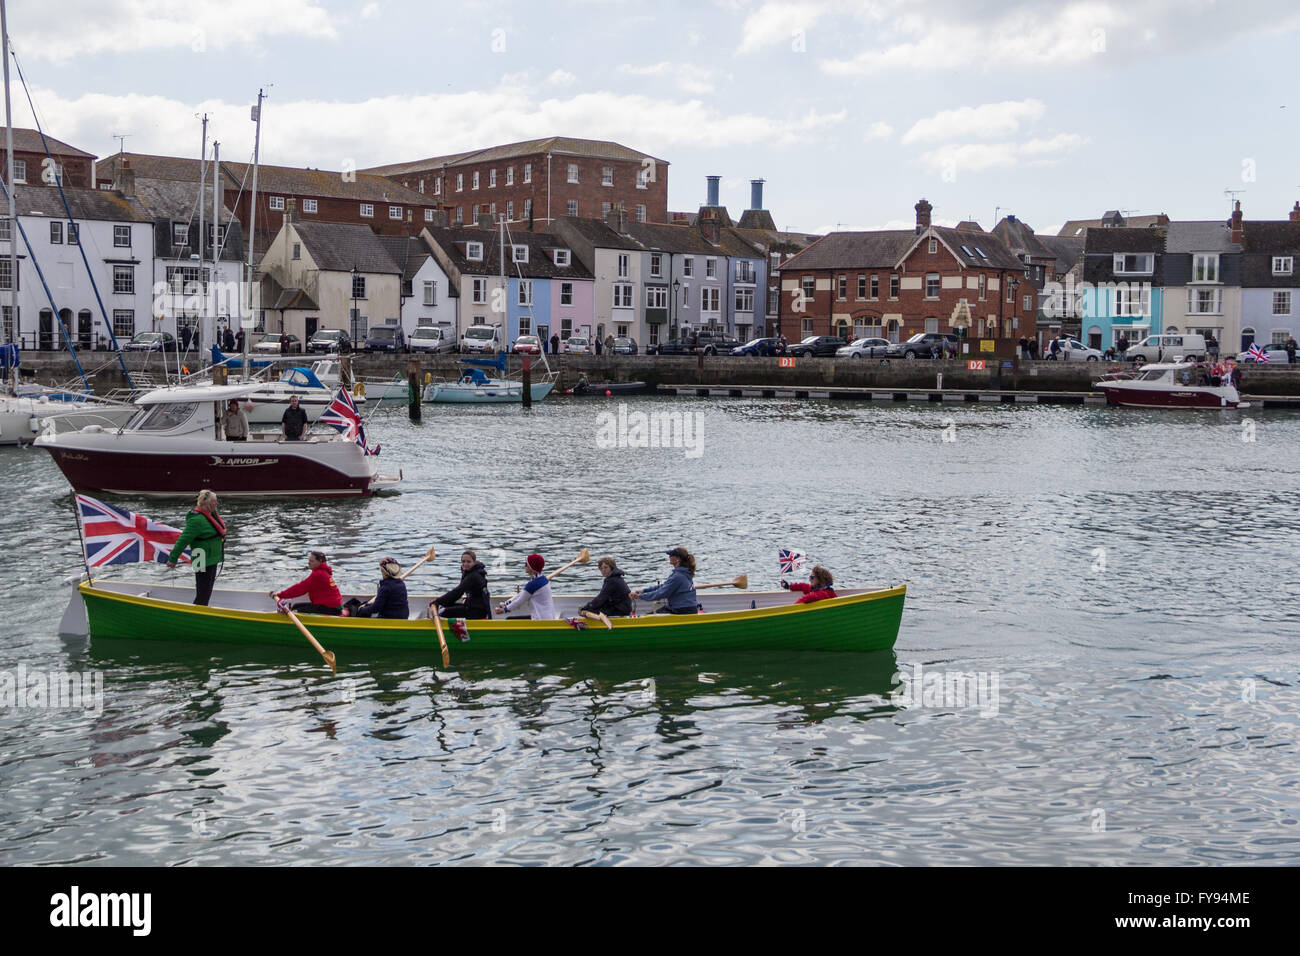 Weymouth, England. 23 April 2016. Queen's 90th Birthday Floating Tribute. Rowing boat with Union Flag. Credit:  Frances Underwood/Alamy Live News Stock Photo